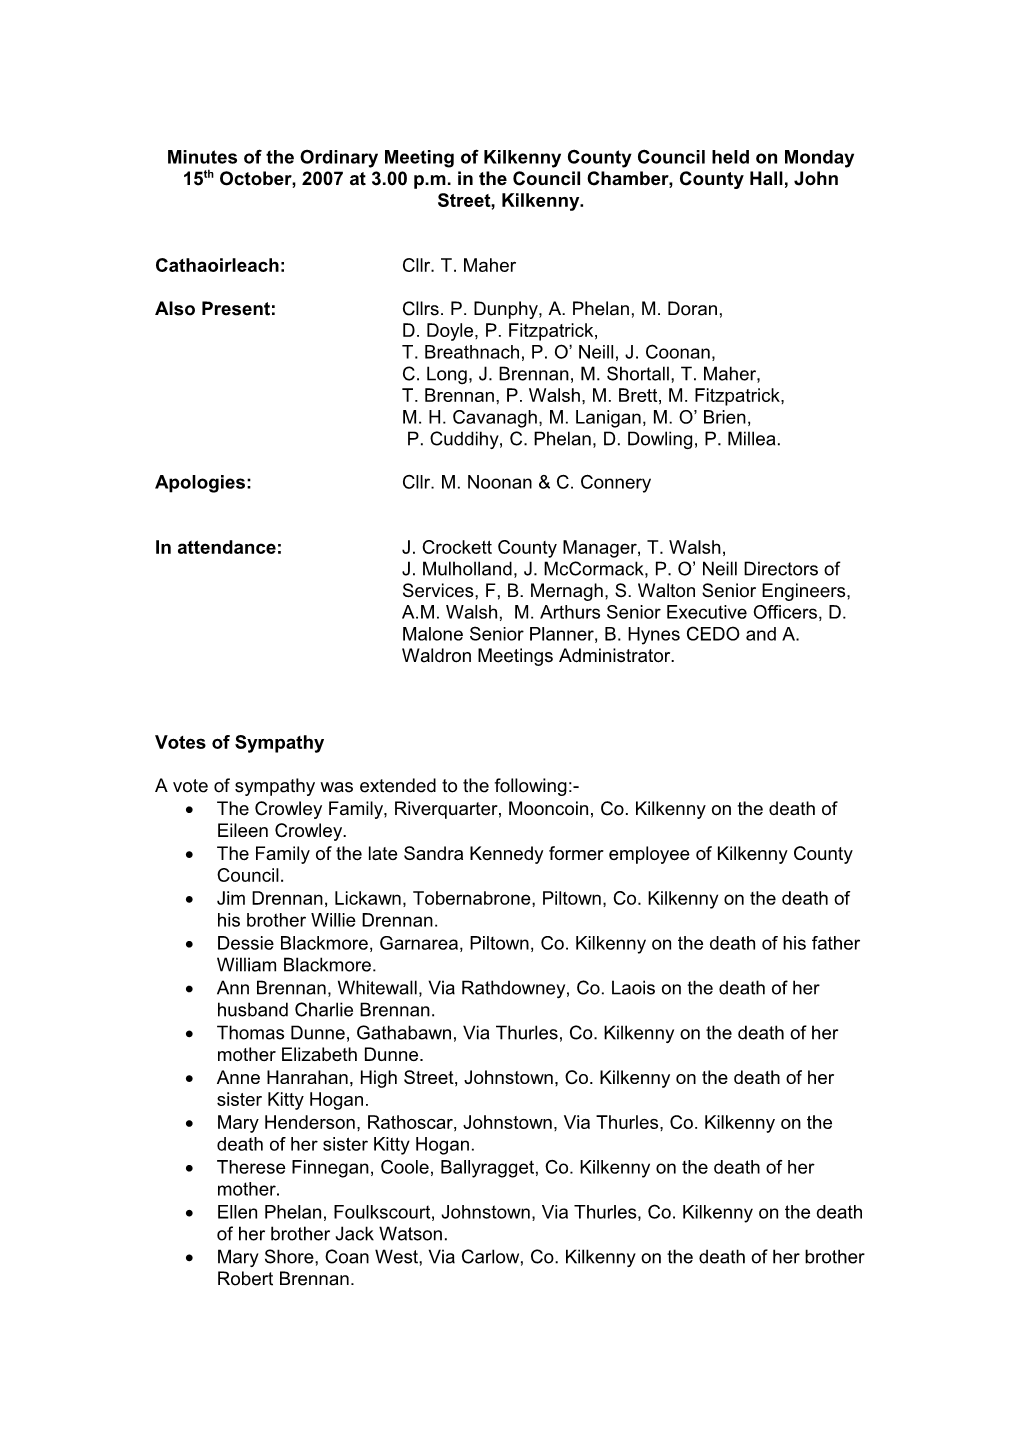 Minutes of the Ordinary Meeting of Kilkenny County Council Held on Monday 17Th September